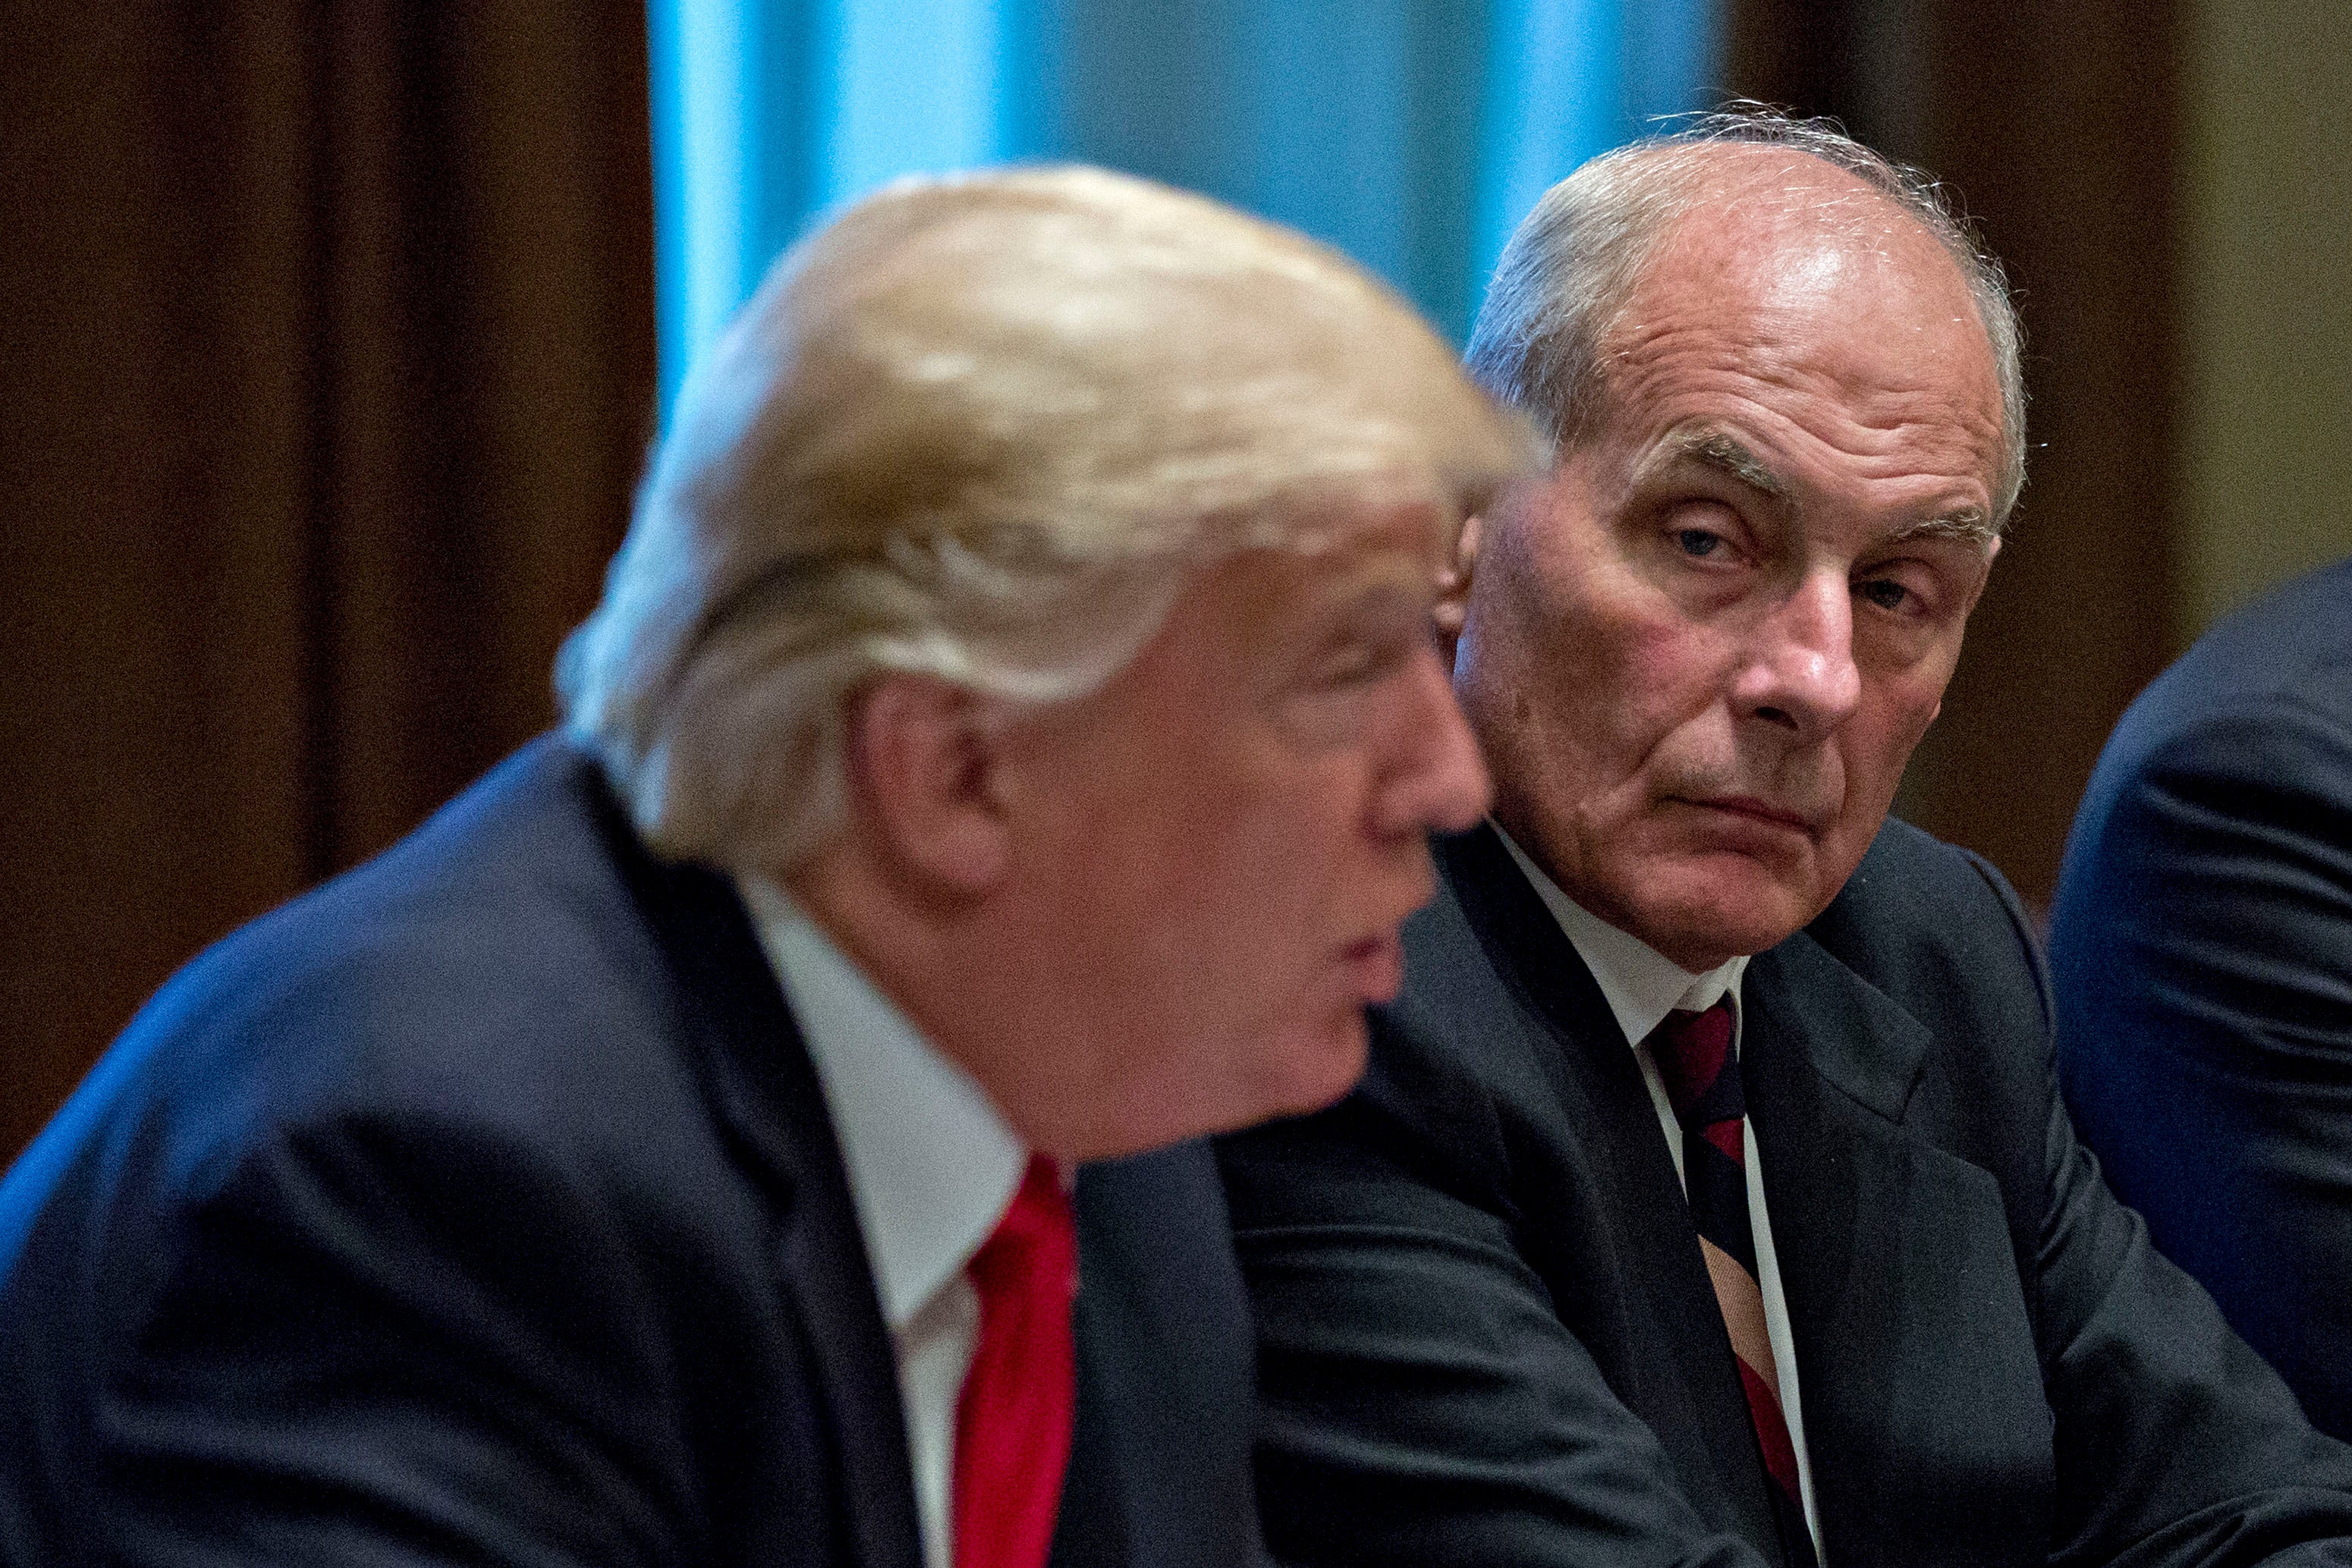 John Kelly served under the Trump administration